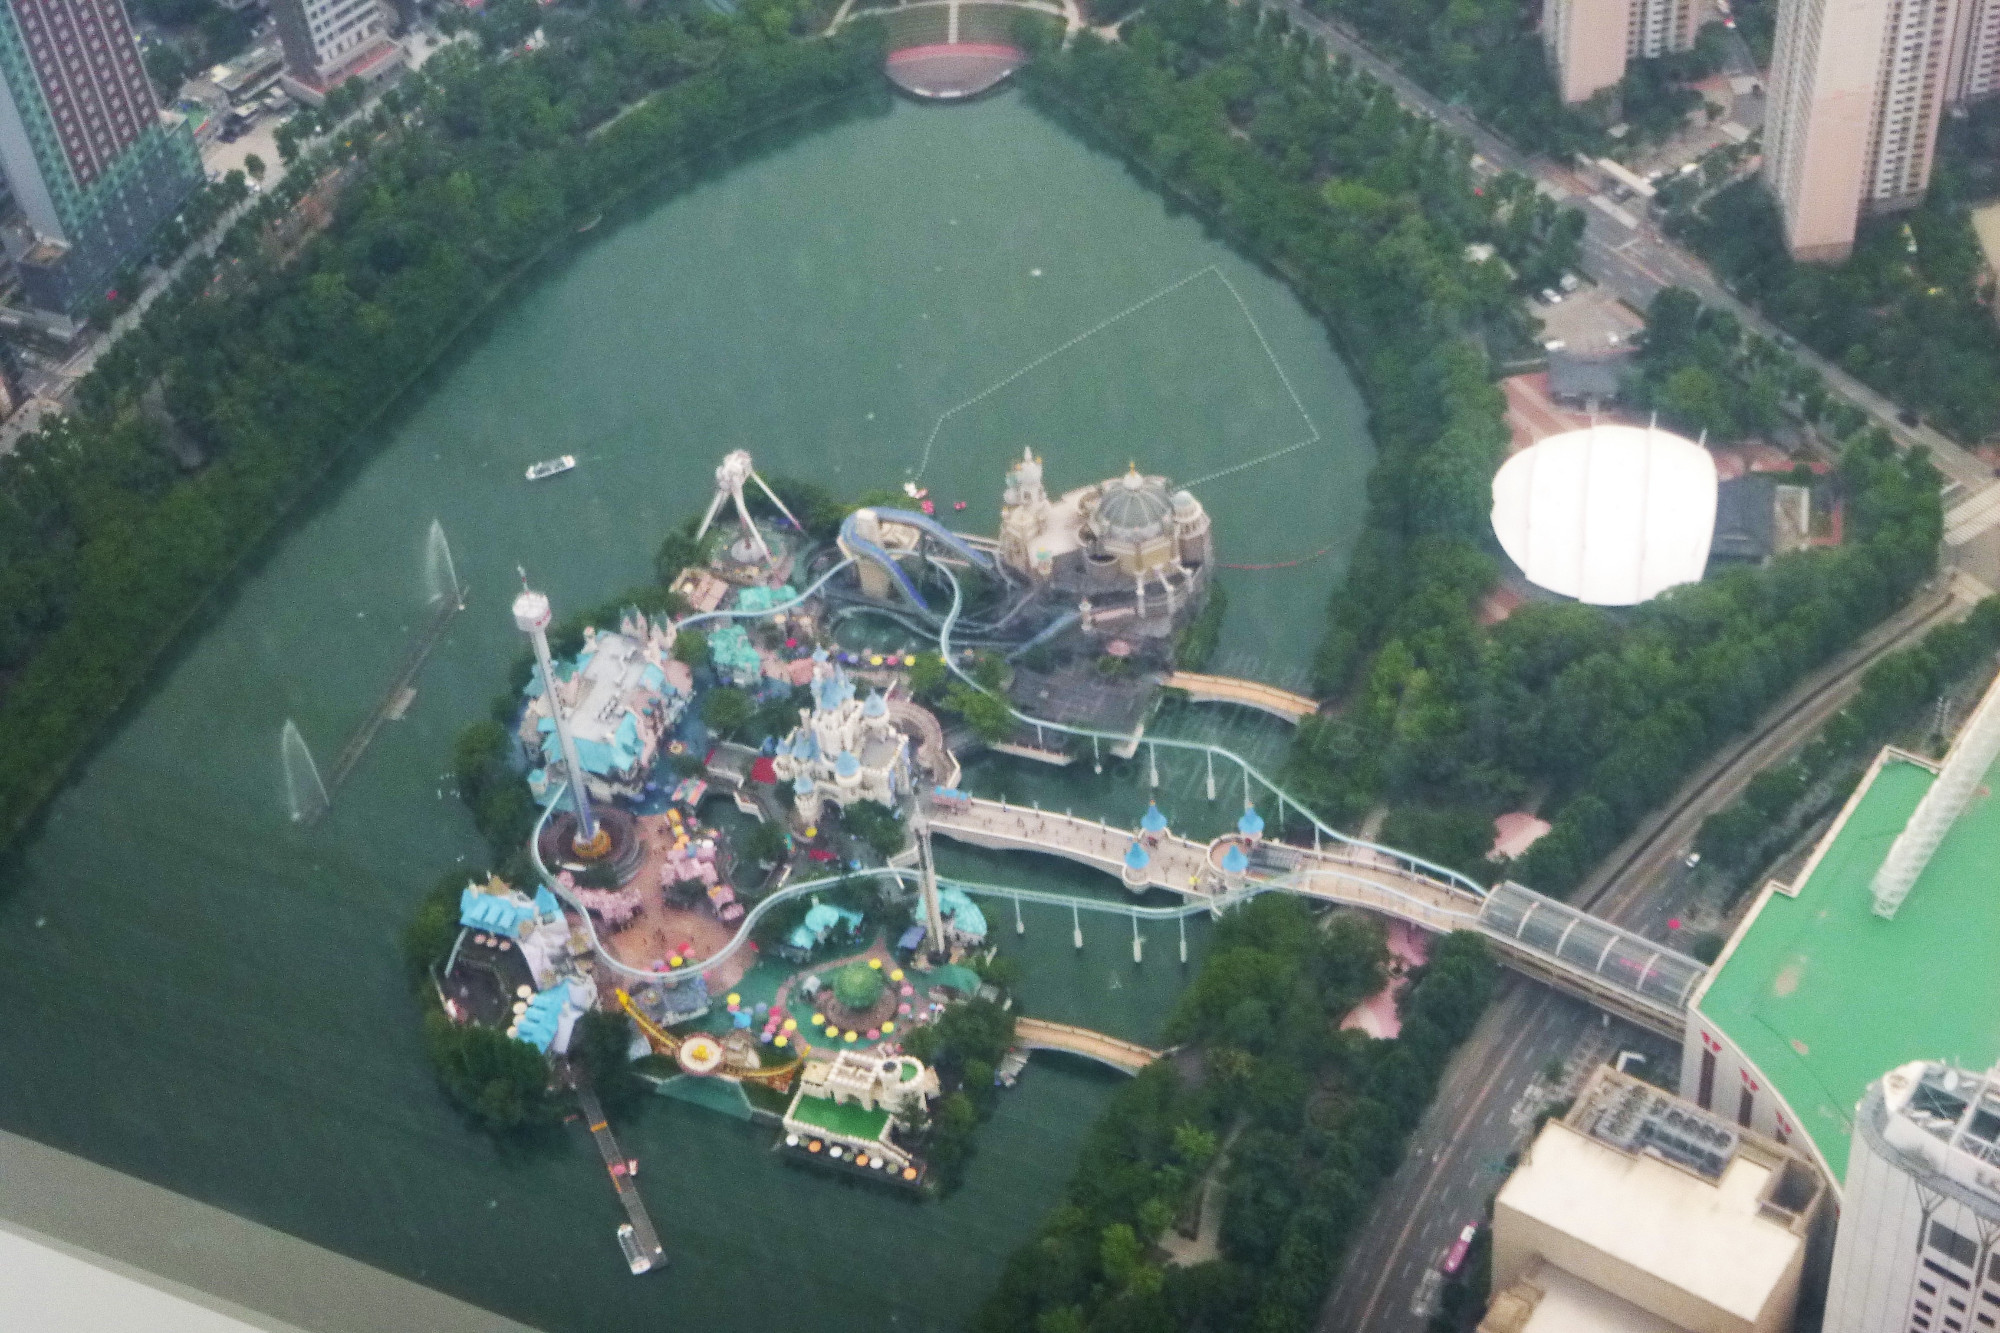 Lotte World from above